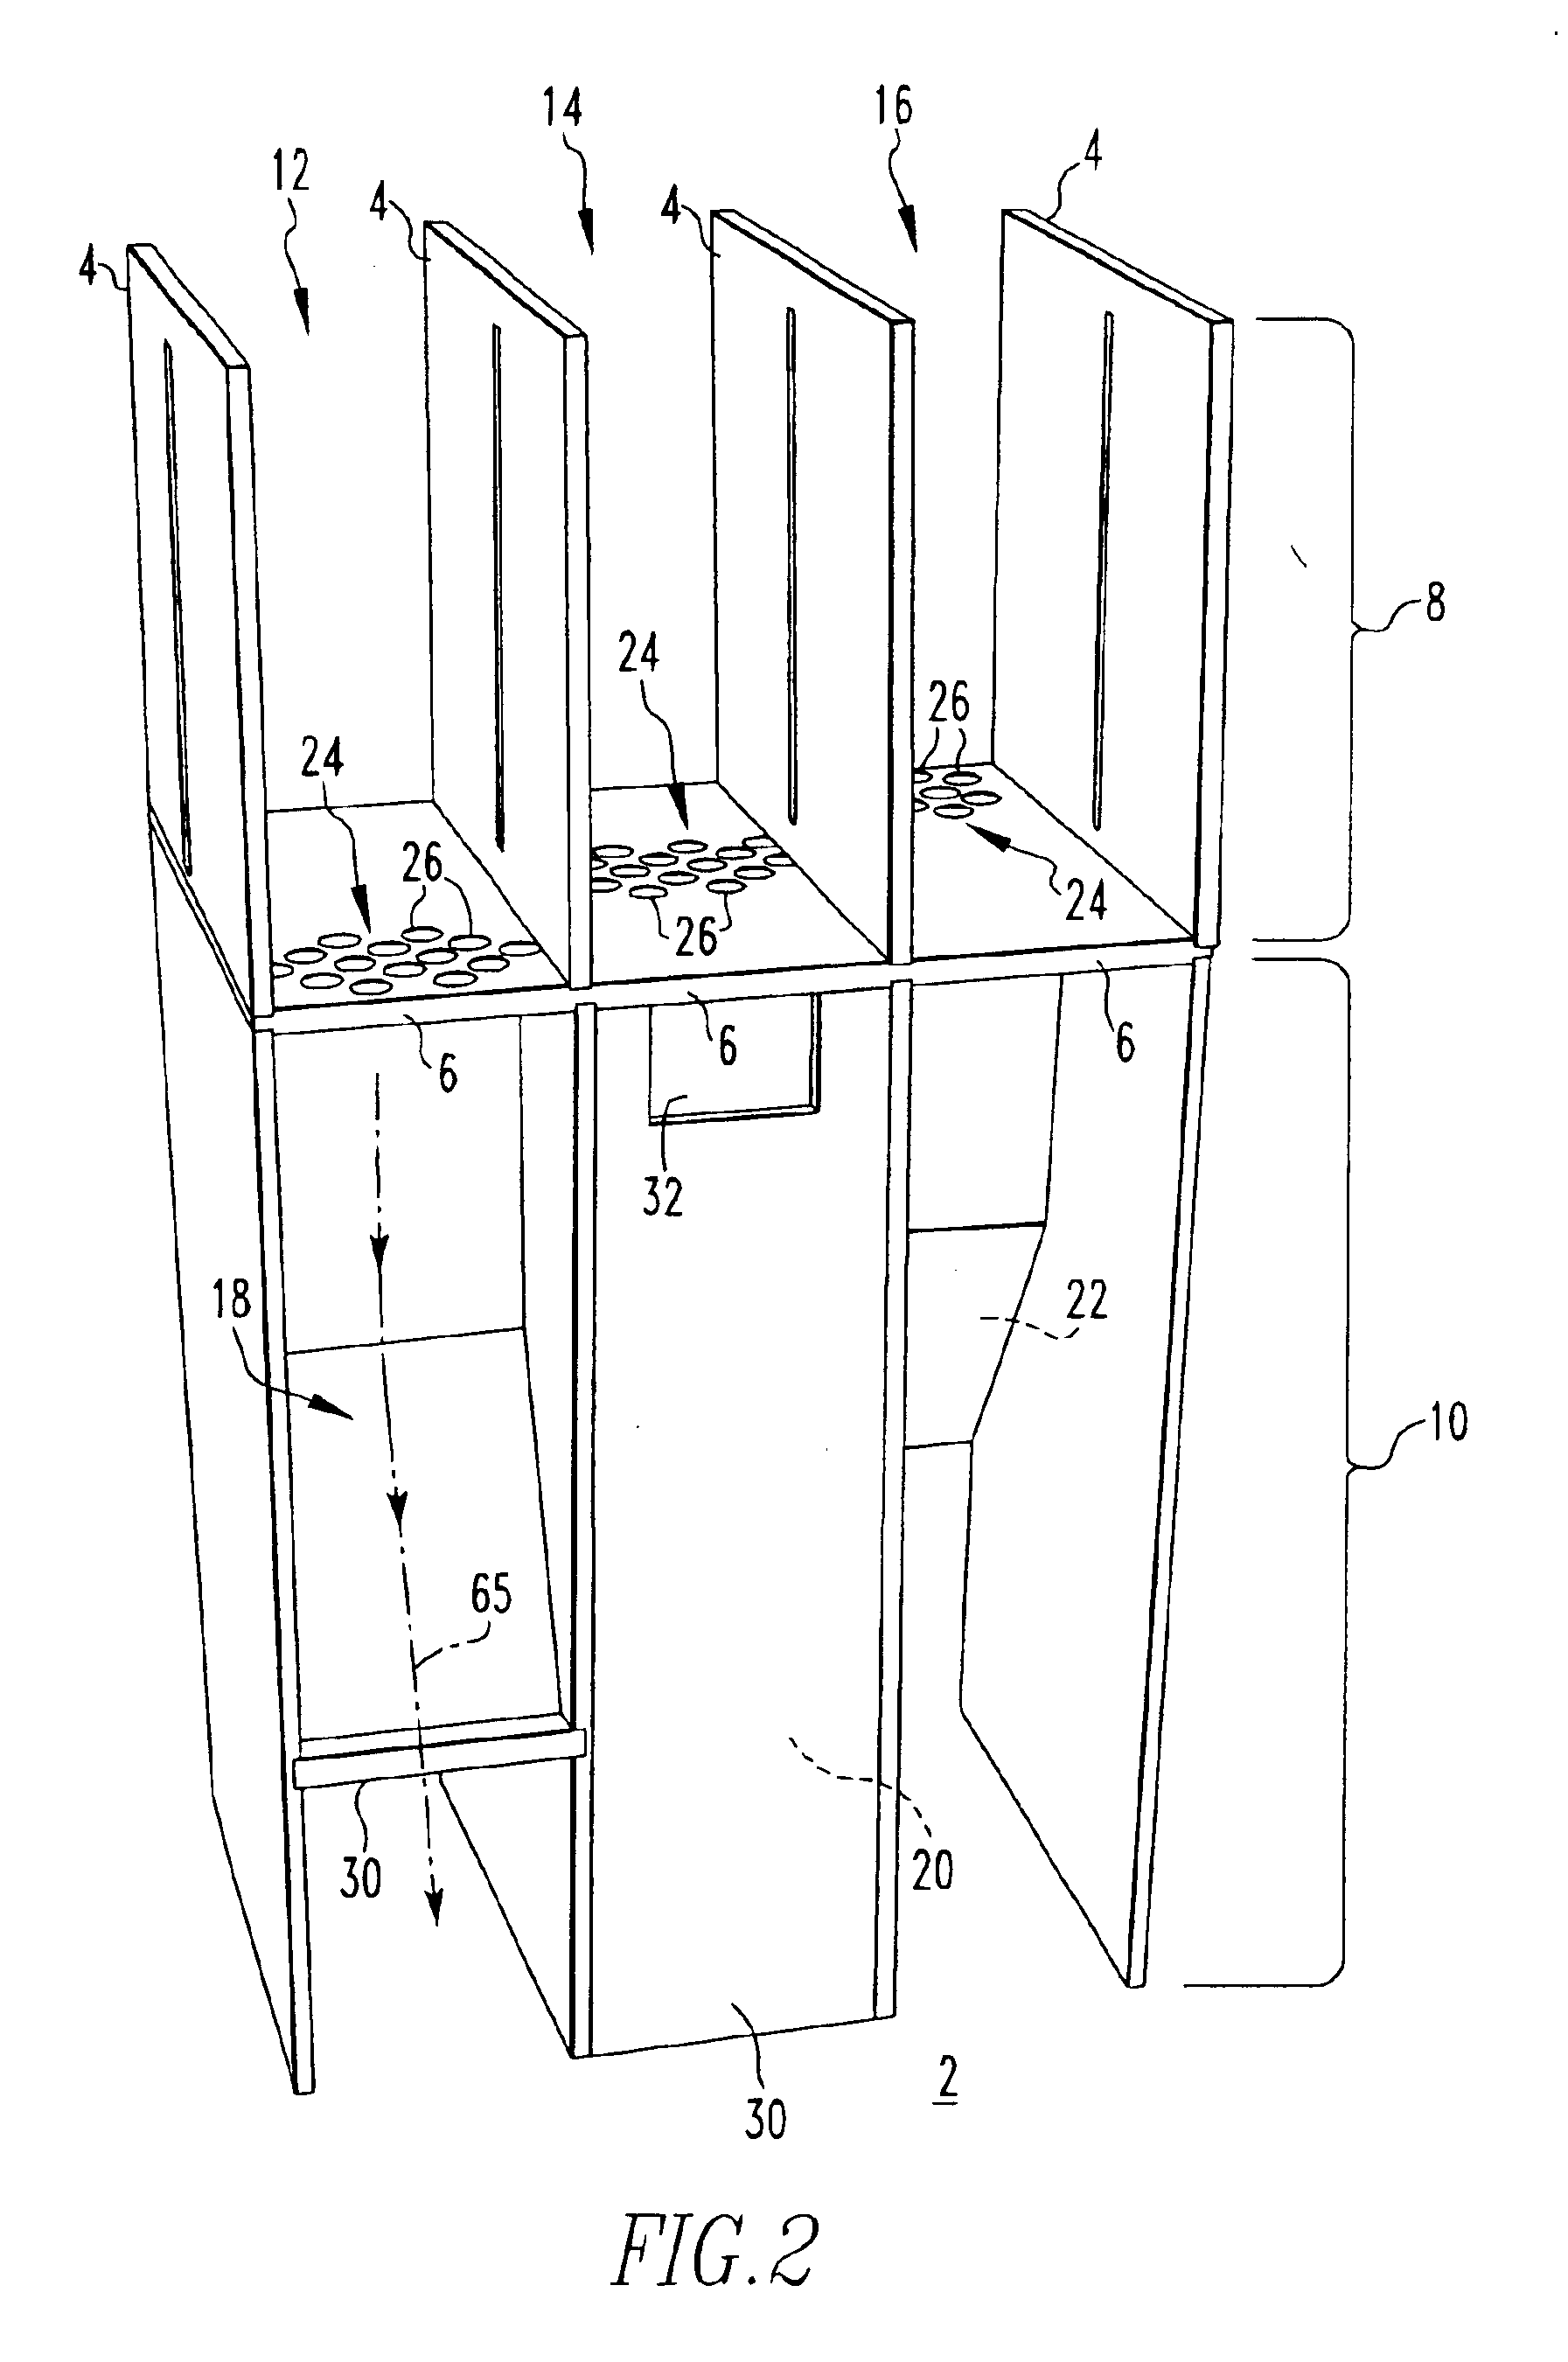 Gas segregator barrier for electrical switching apparatus